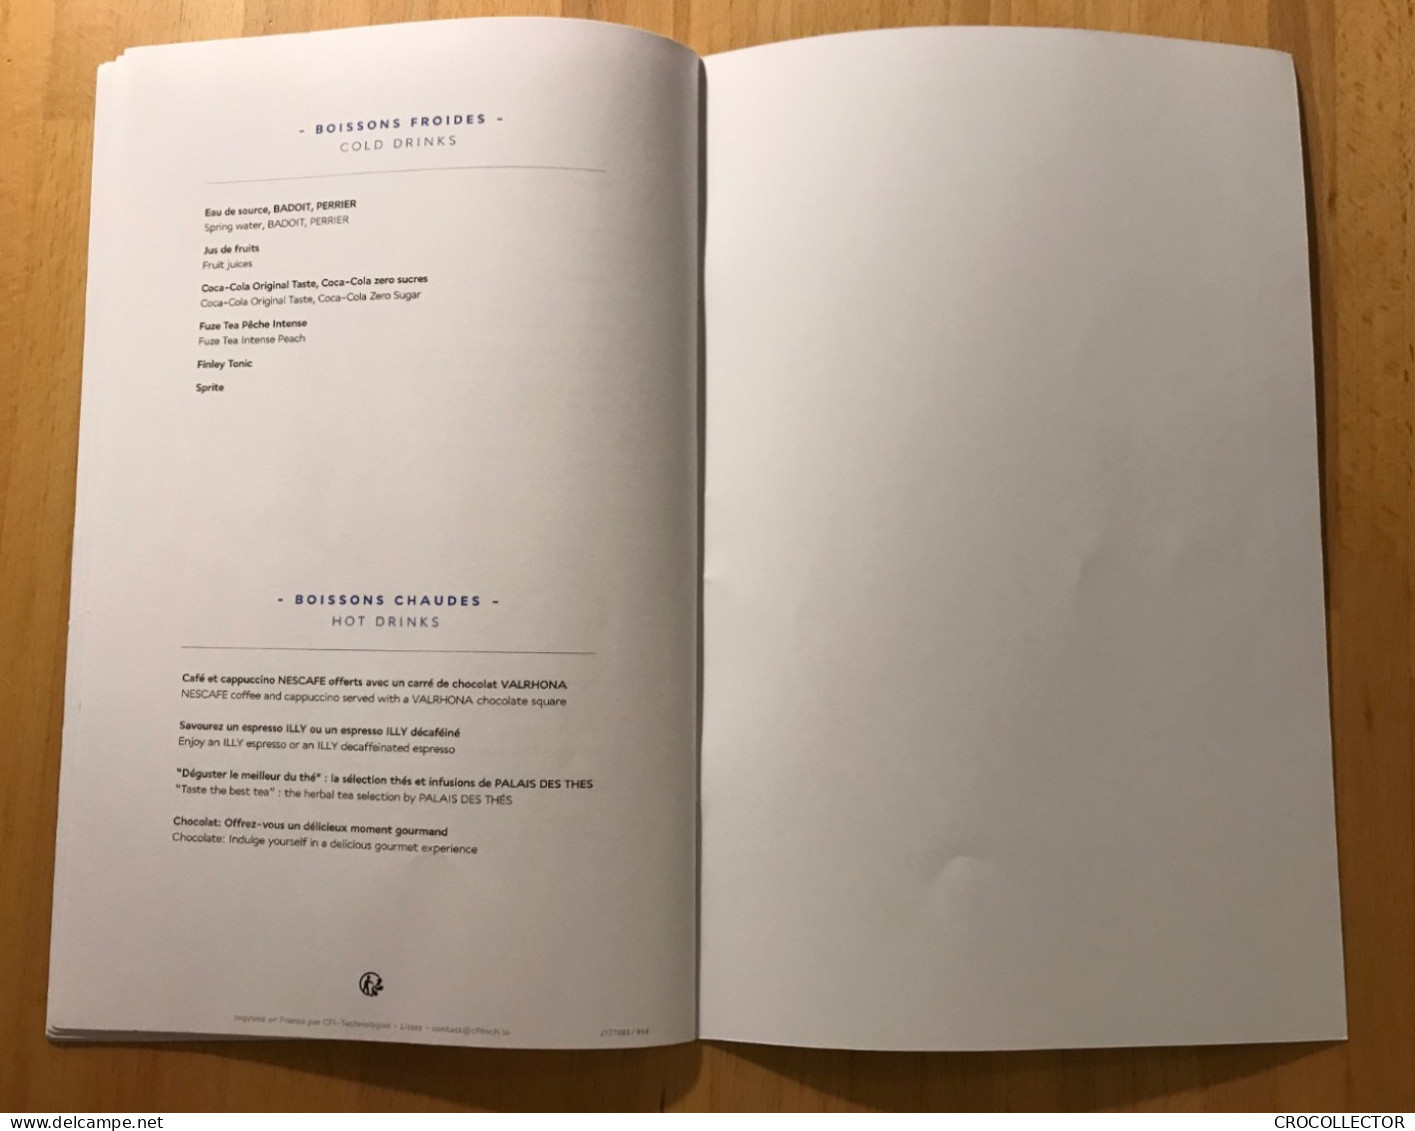 AIR FRANCE 14 pages Business Class Menu SIN-CDG 14 FEB 2023 J177083